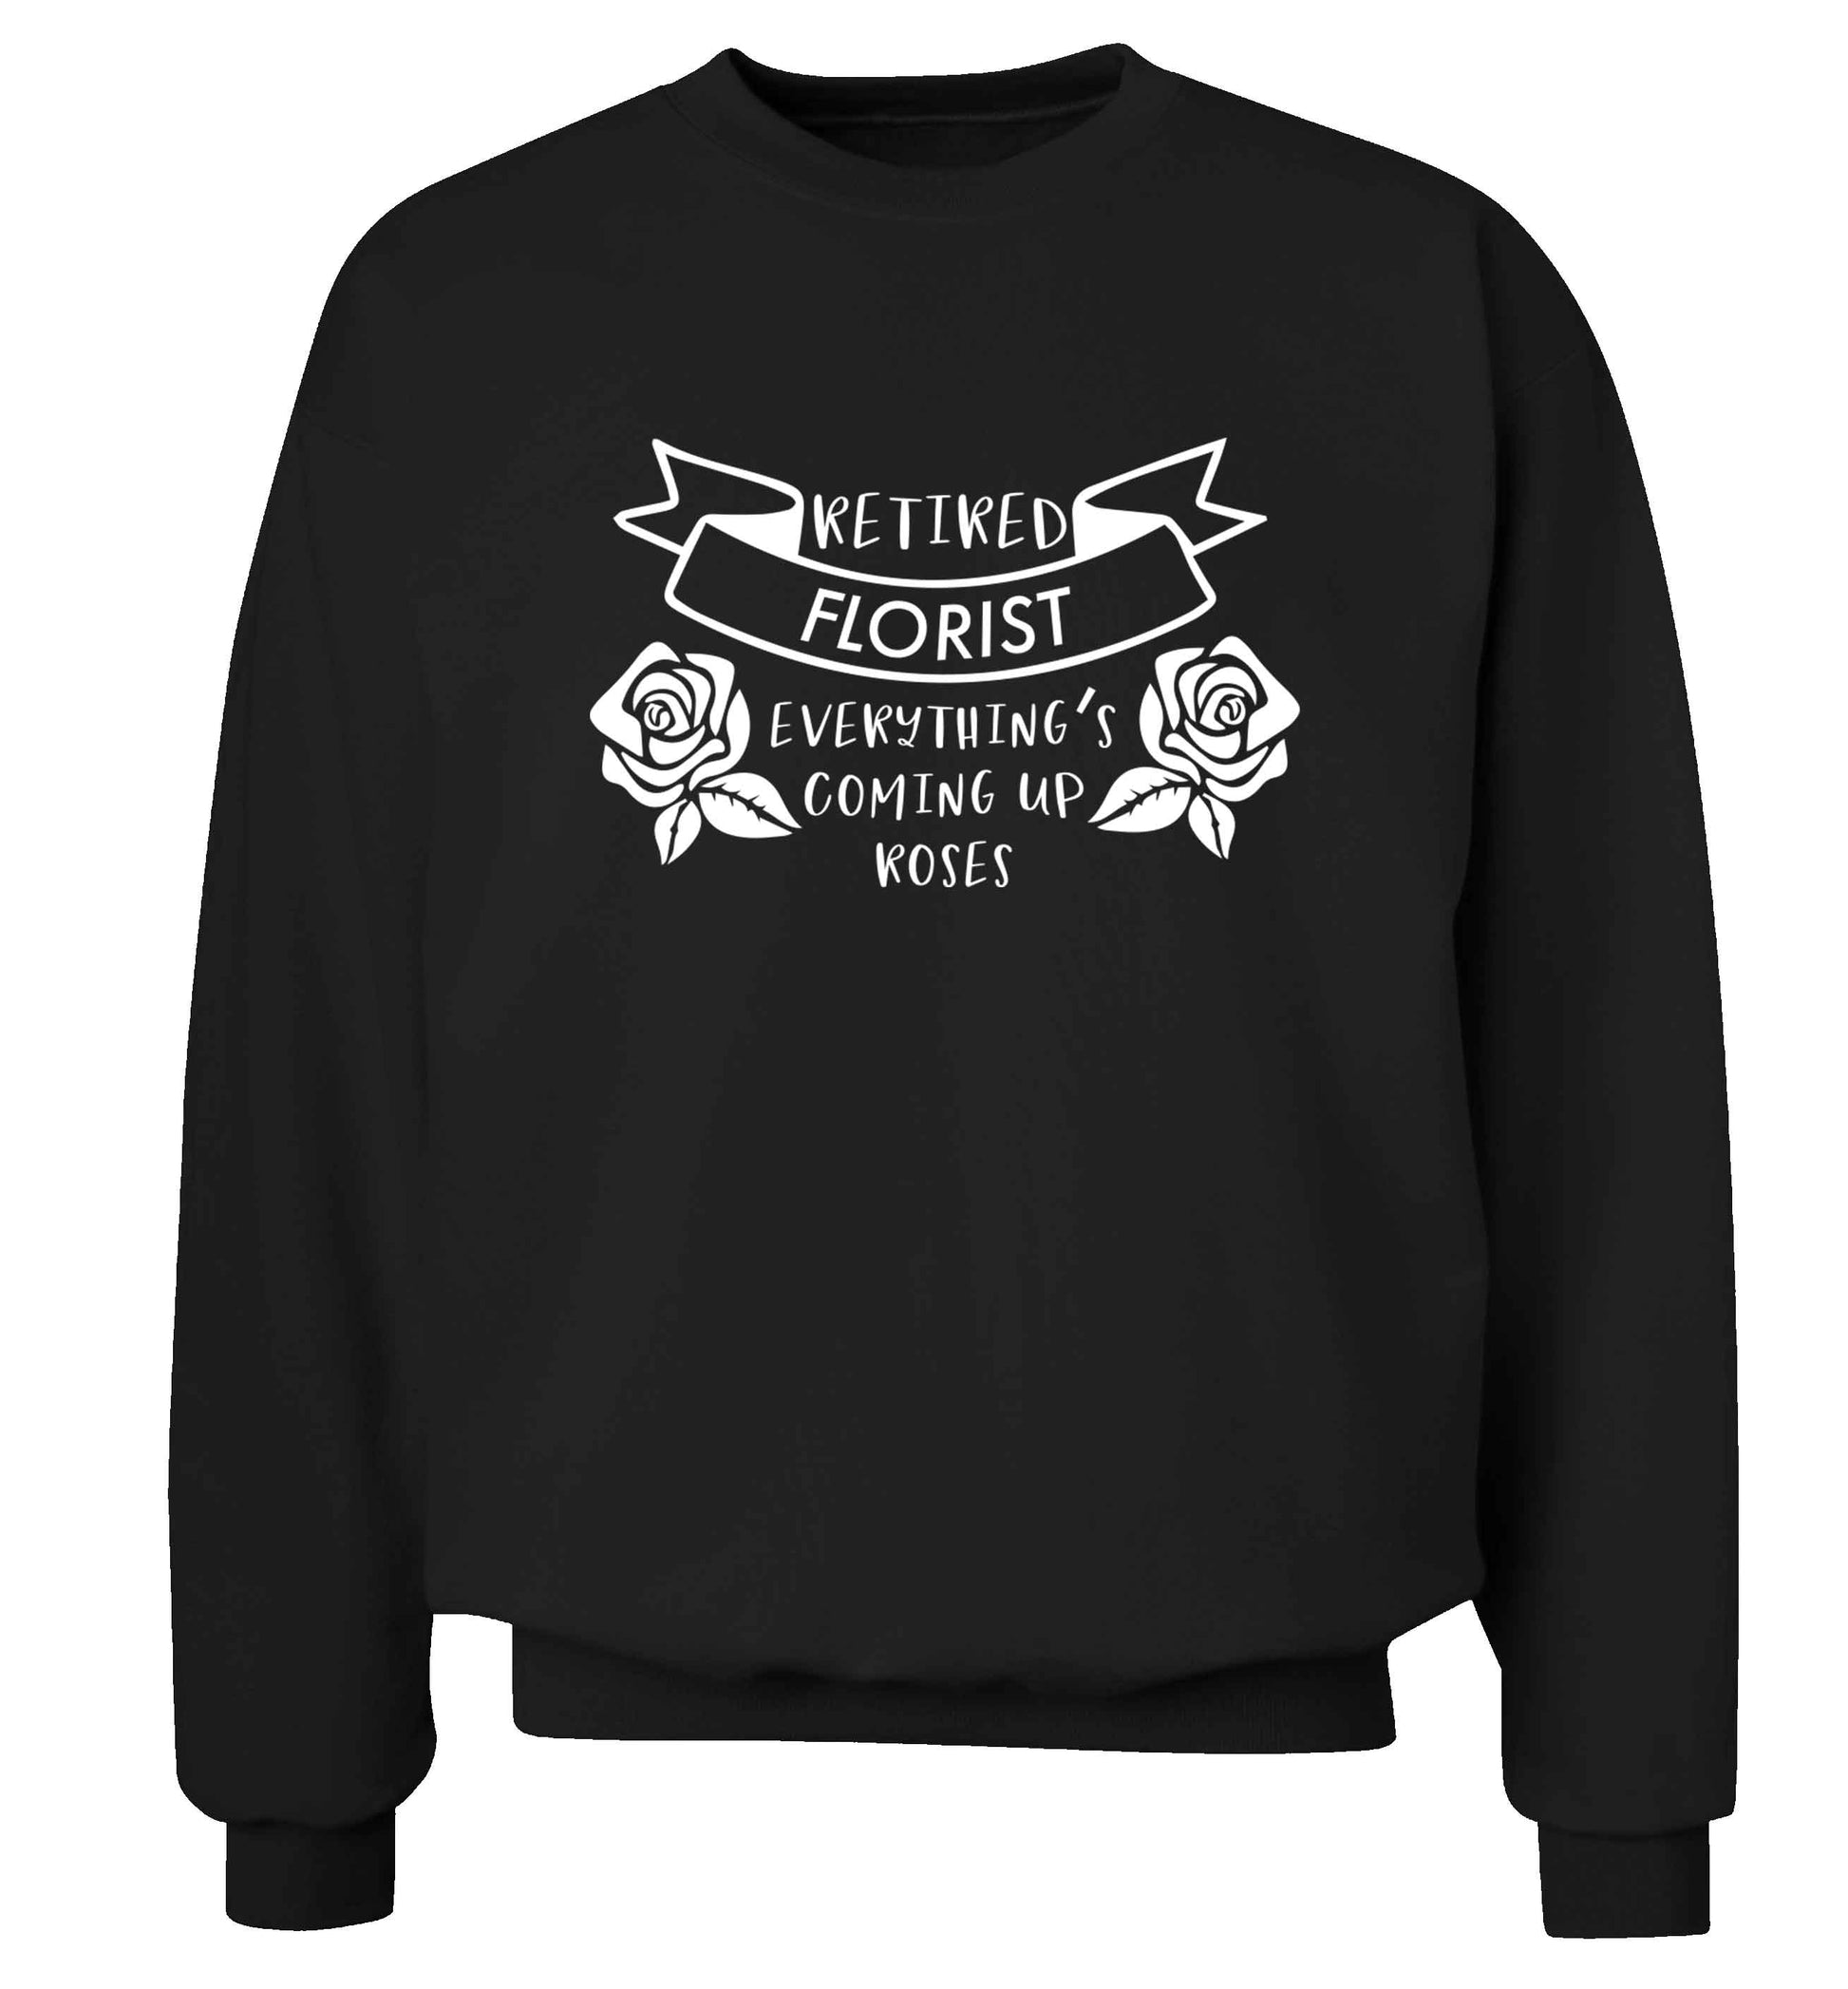 Retired florist everything's coming up roses Adult's unisex black Sweater 2XL